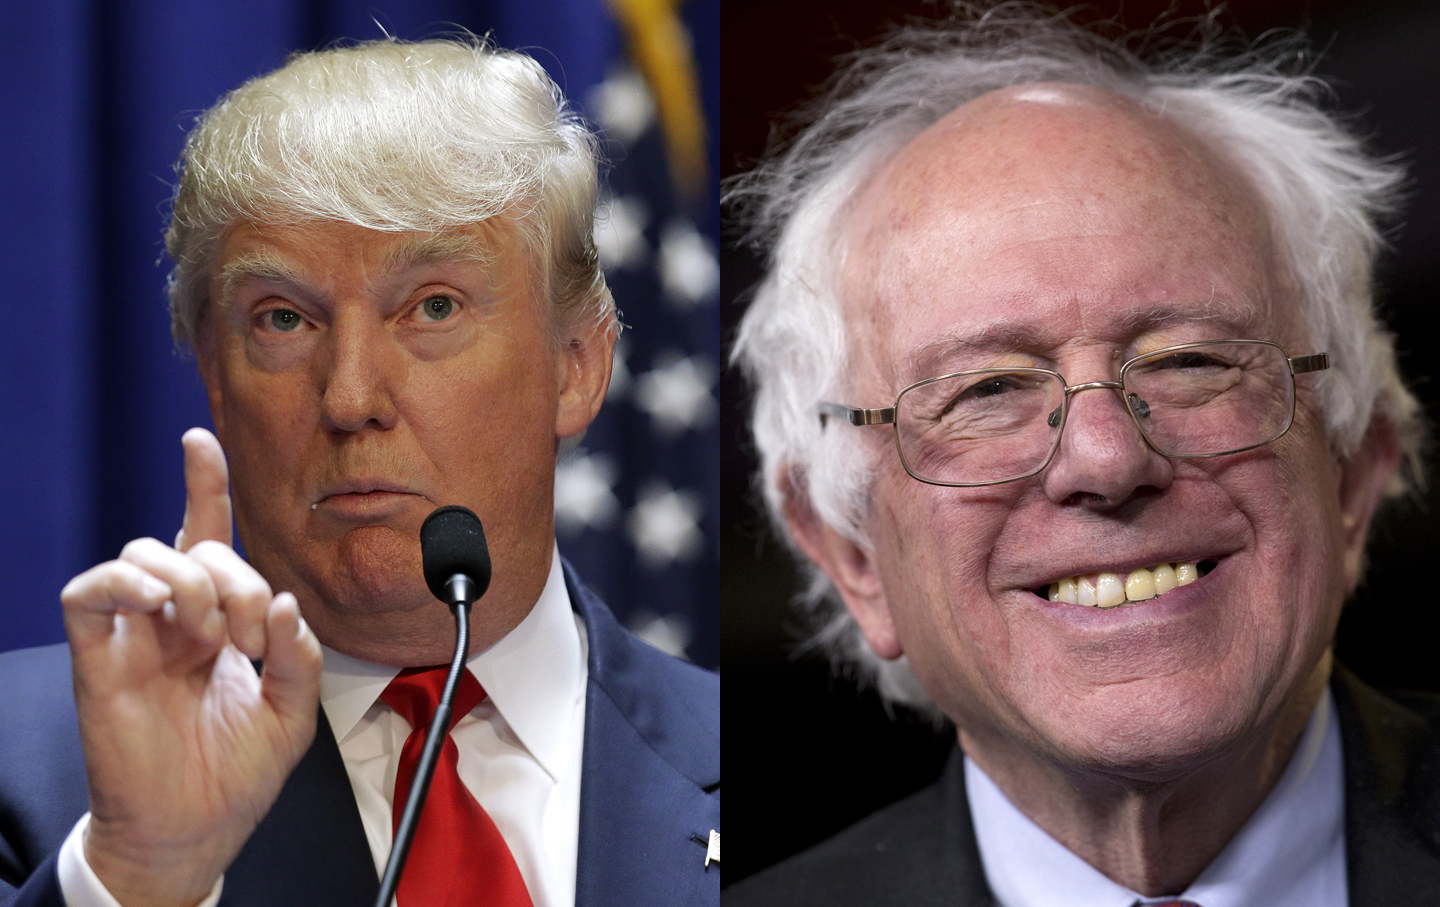 The Discourse Suffers When Trump Gets 23 Times As Much Coverage as Sanders